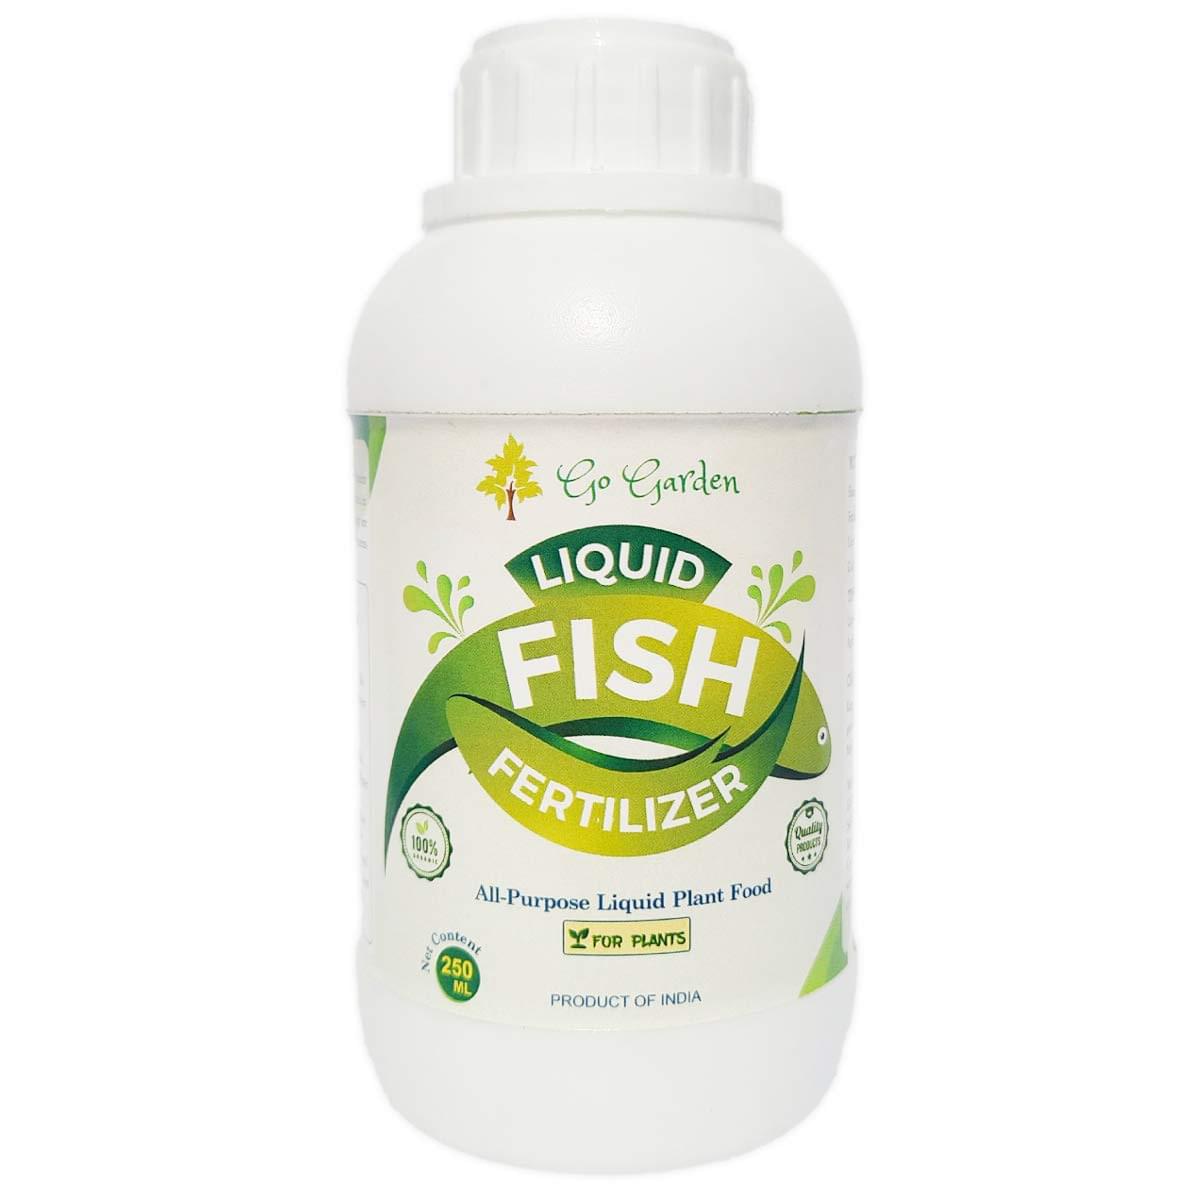 Liquid Fish Fertilizer for Plants – Widely used for Lemon Plant – All